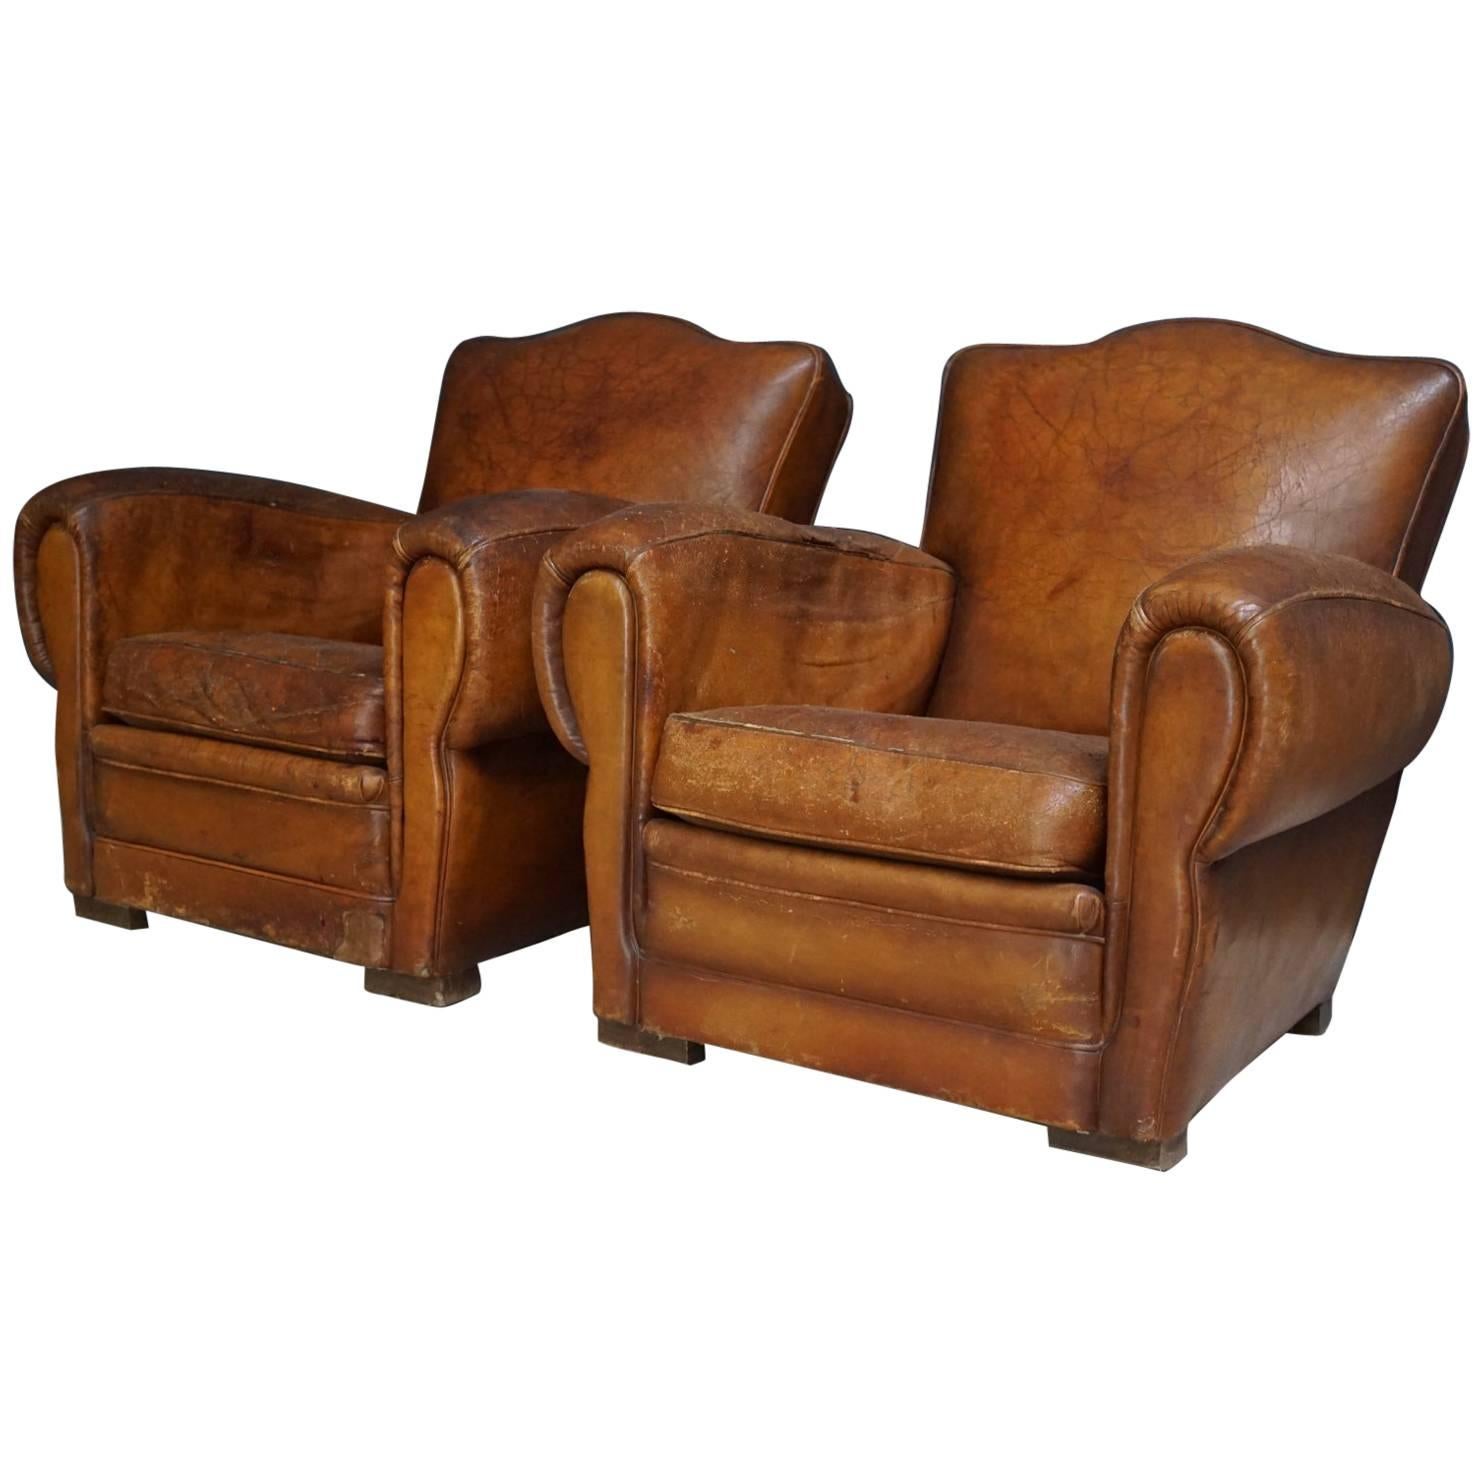 Pair of French Cognac Leather Club Chairs, 1940s